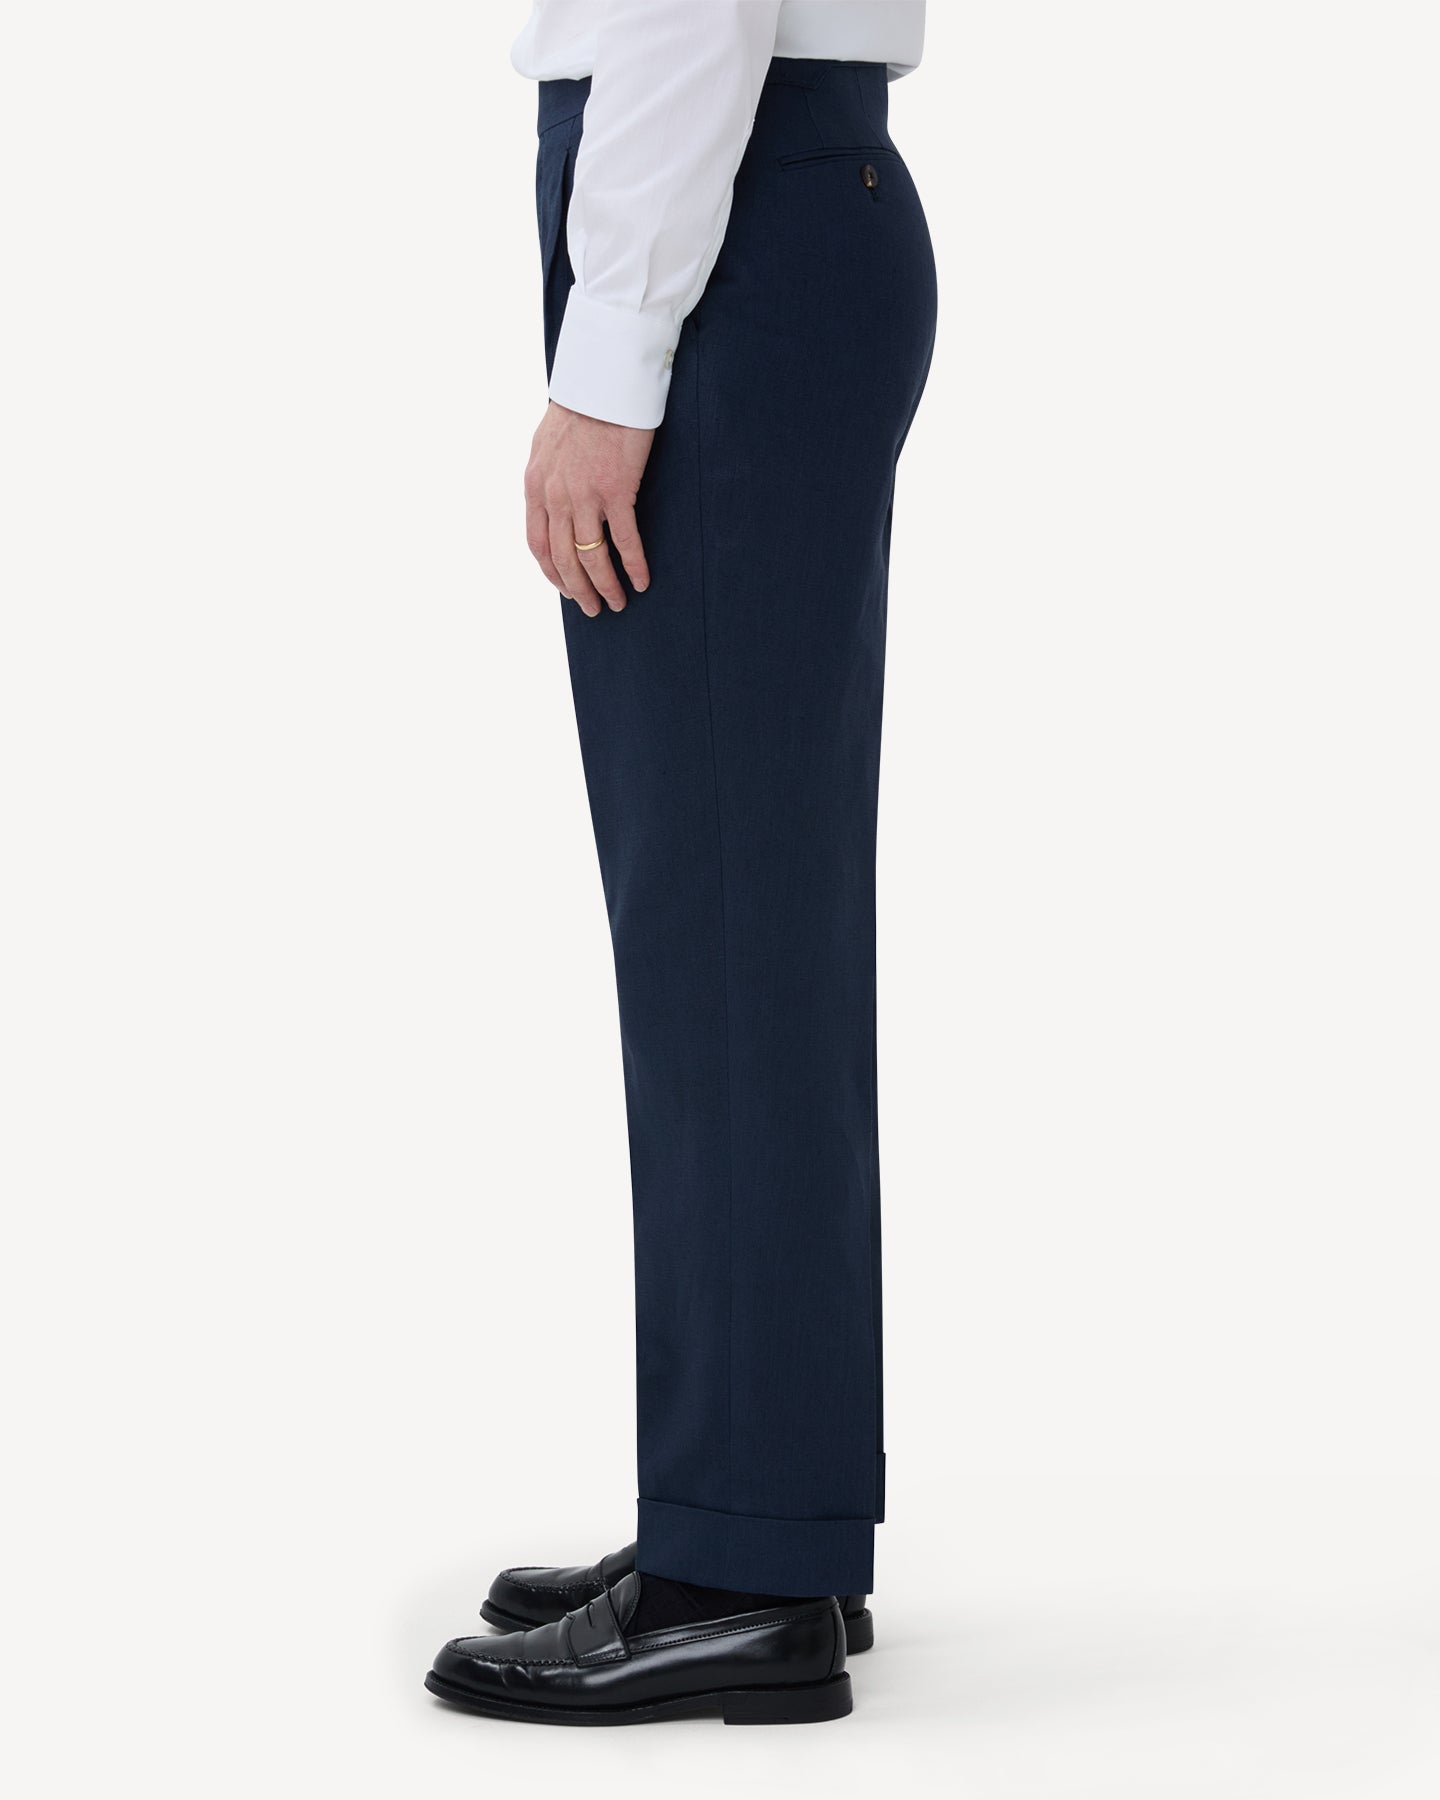 The side of navy linen trousers with single pleats and side adjusters